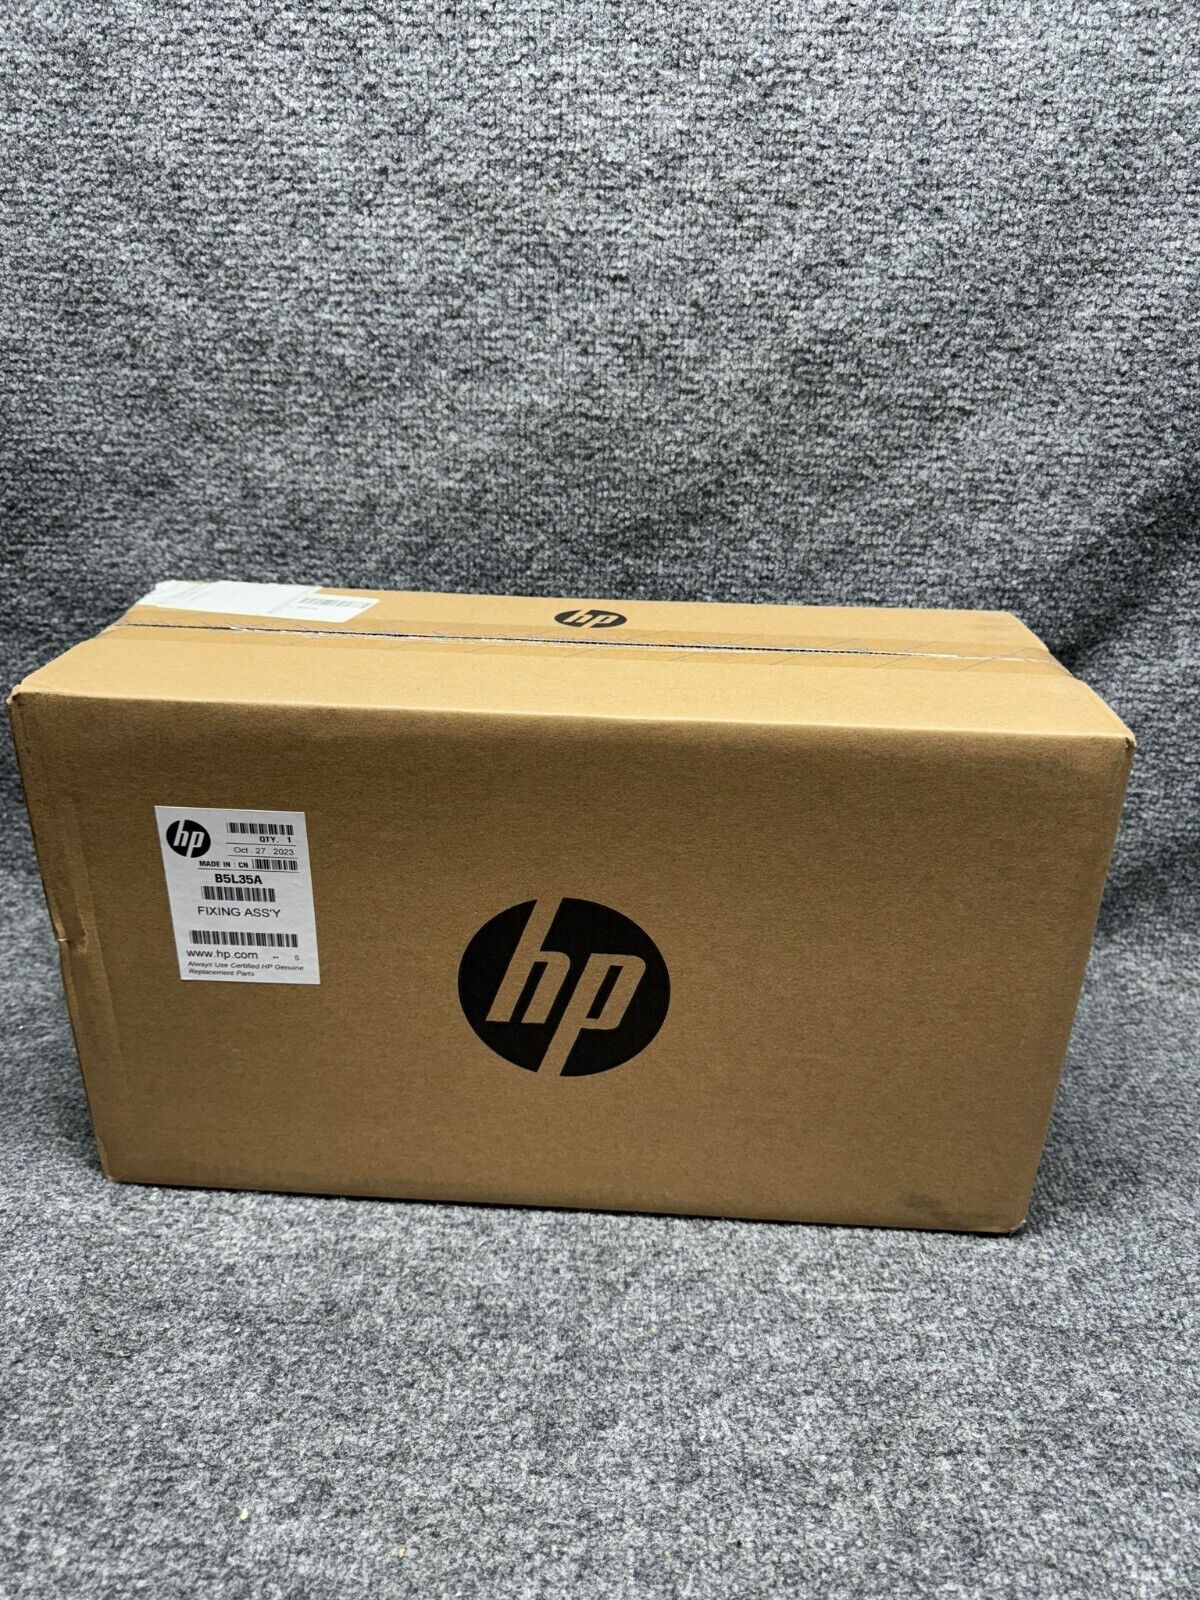 HP B5L35A 110V Fuser Kit 150,000 Page-Yield, NEW GENUINE SEALED